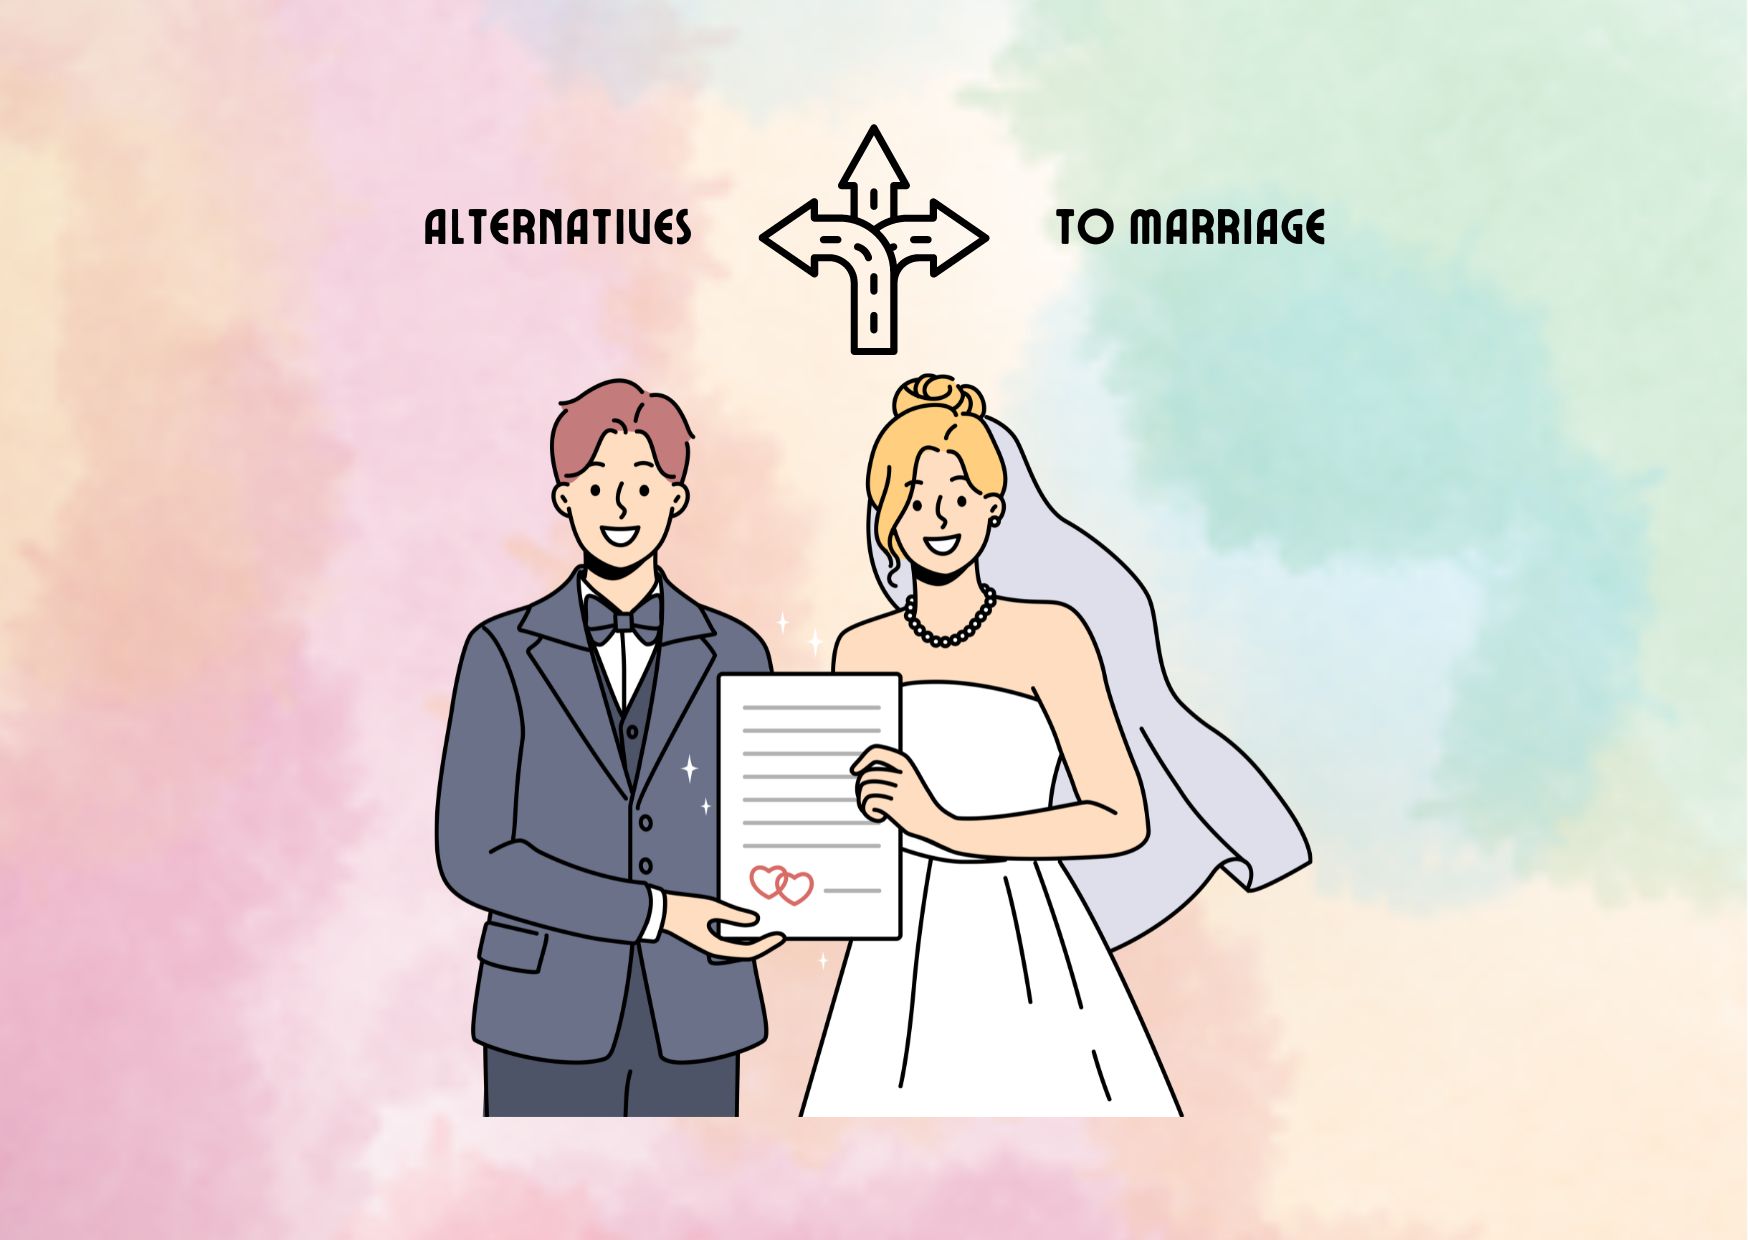 Alternatives to Marriage